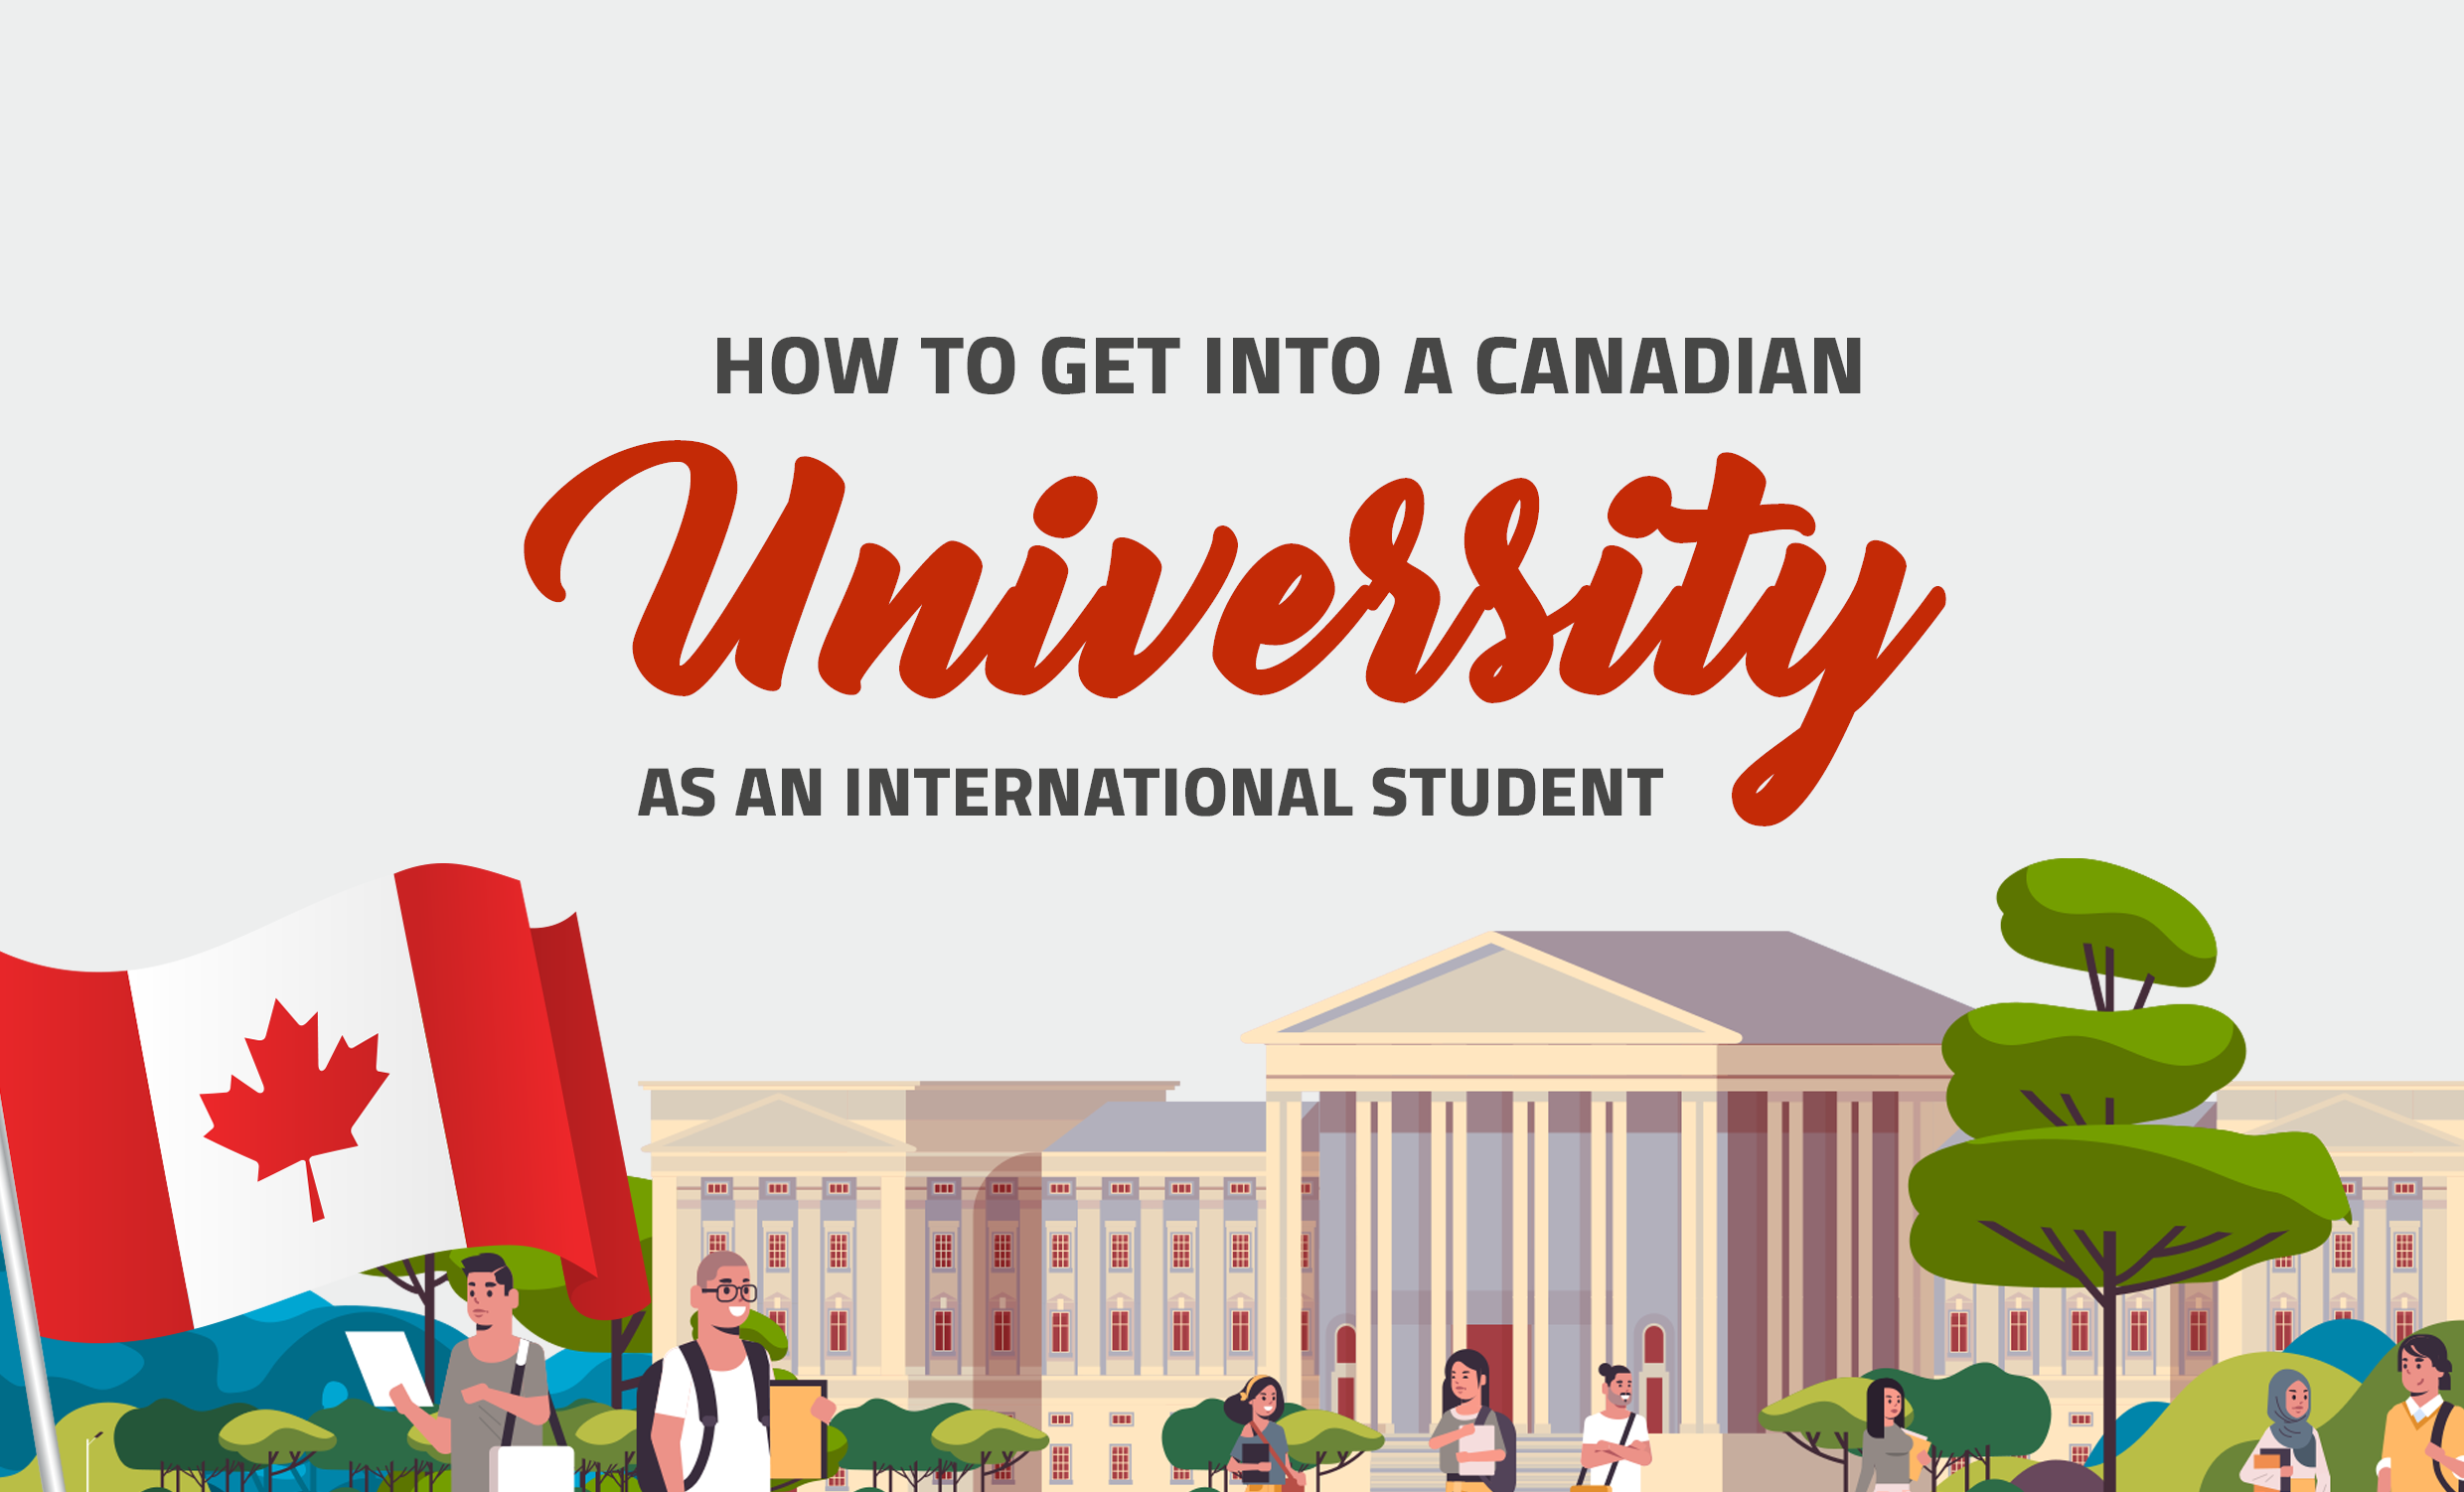 HOW TO GET INTO A CANADIAN UNIVERSITY AS AN INTERNATIONAL STUDENT